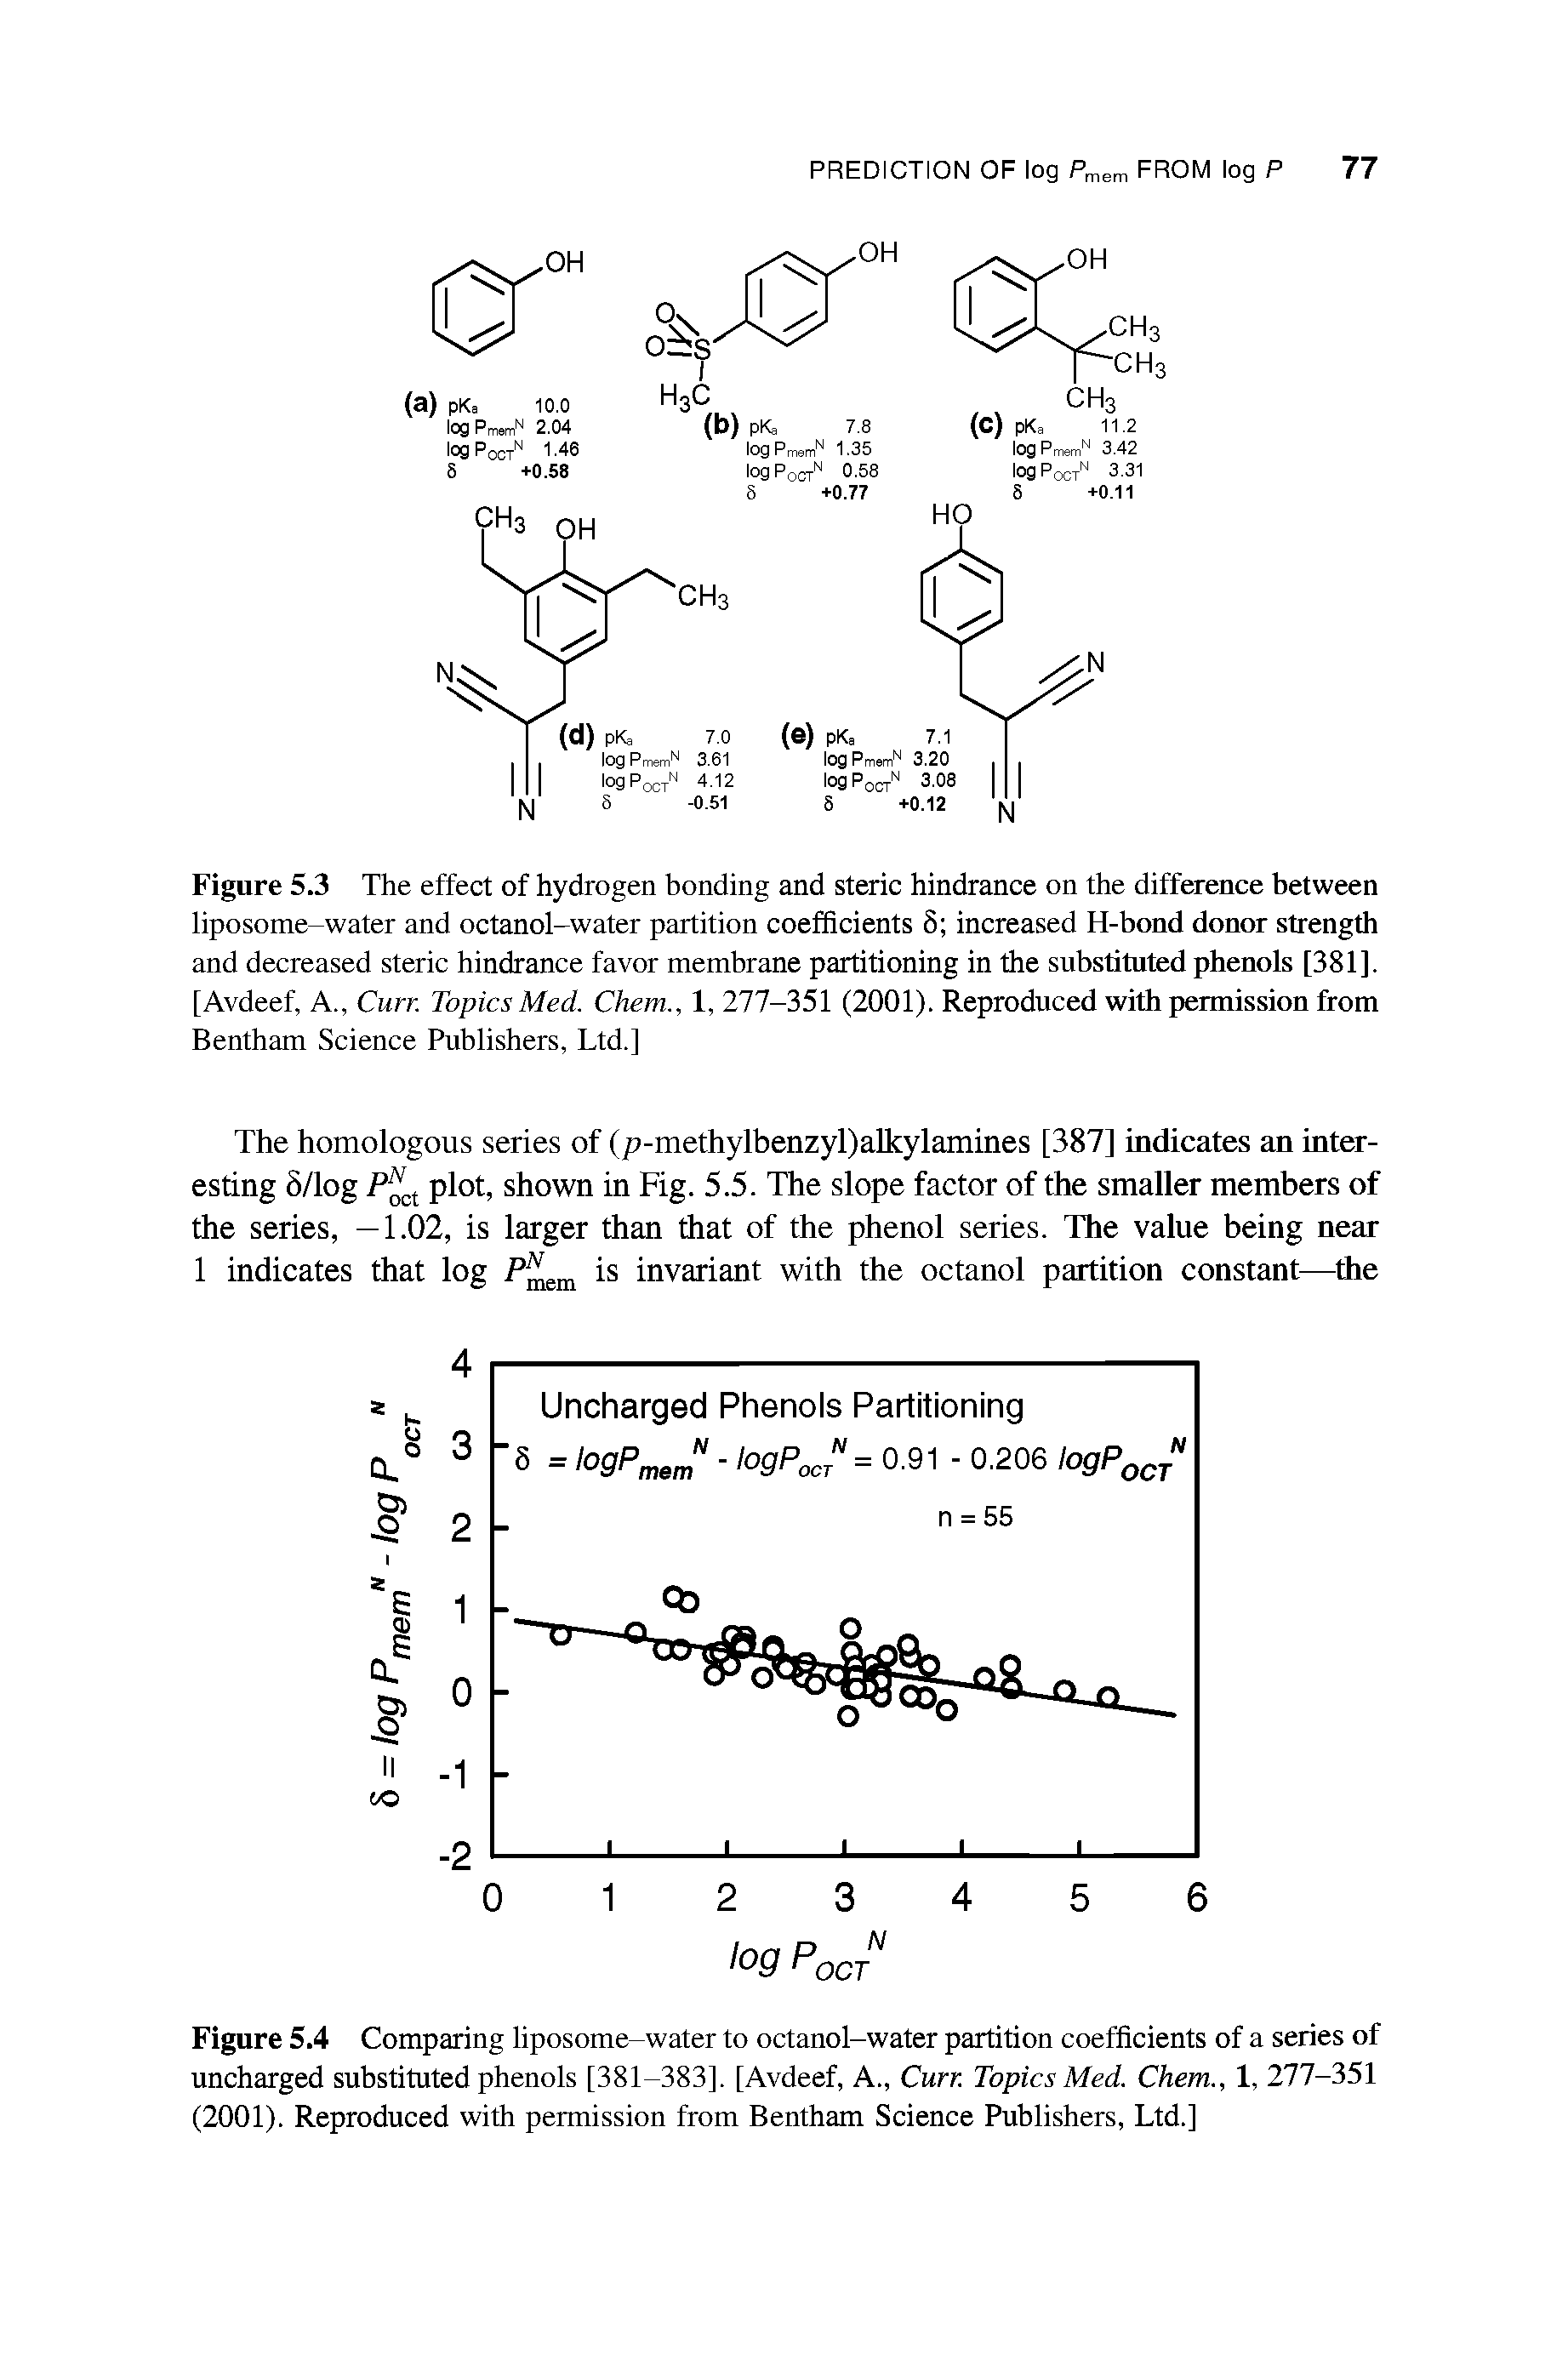 Figure 5.4 Comparing liposome-water to octanol-water partition coefficients of a series of uncharged substituted phenols [381-383], [Avdeef, A., Curr. Topics Med. Chem., 1, 277-351 (2001). Reproduced with permission from Bentham Science Publishers, Ltd.]...